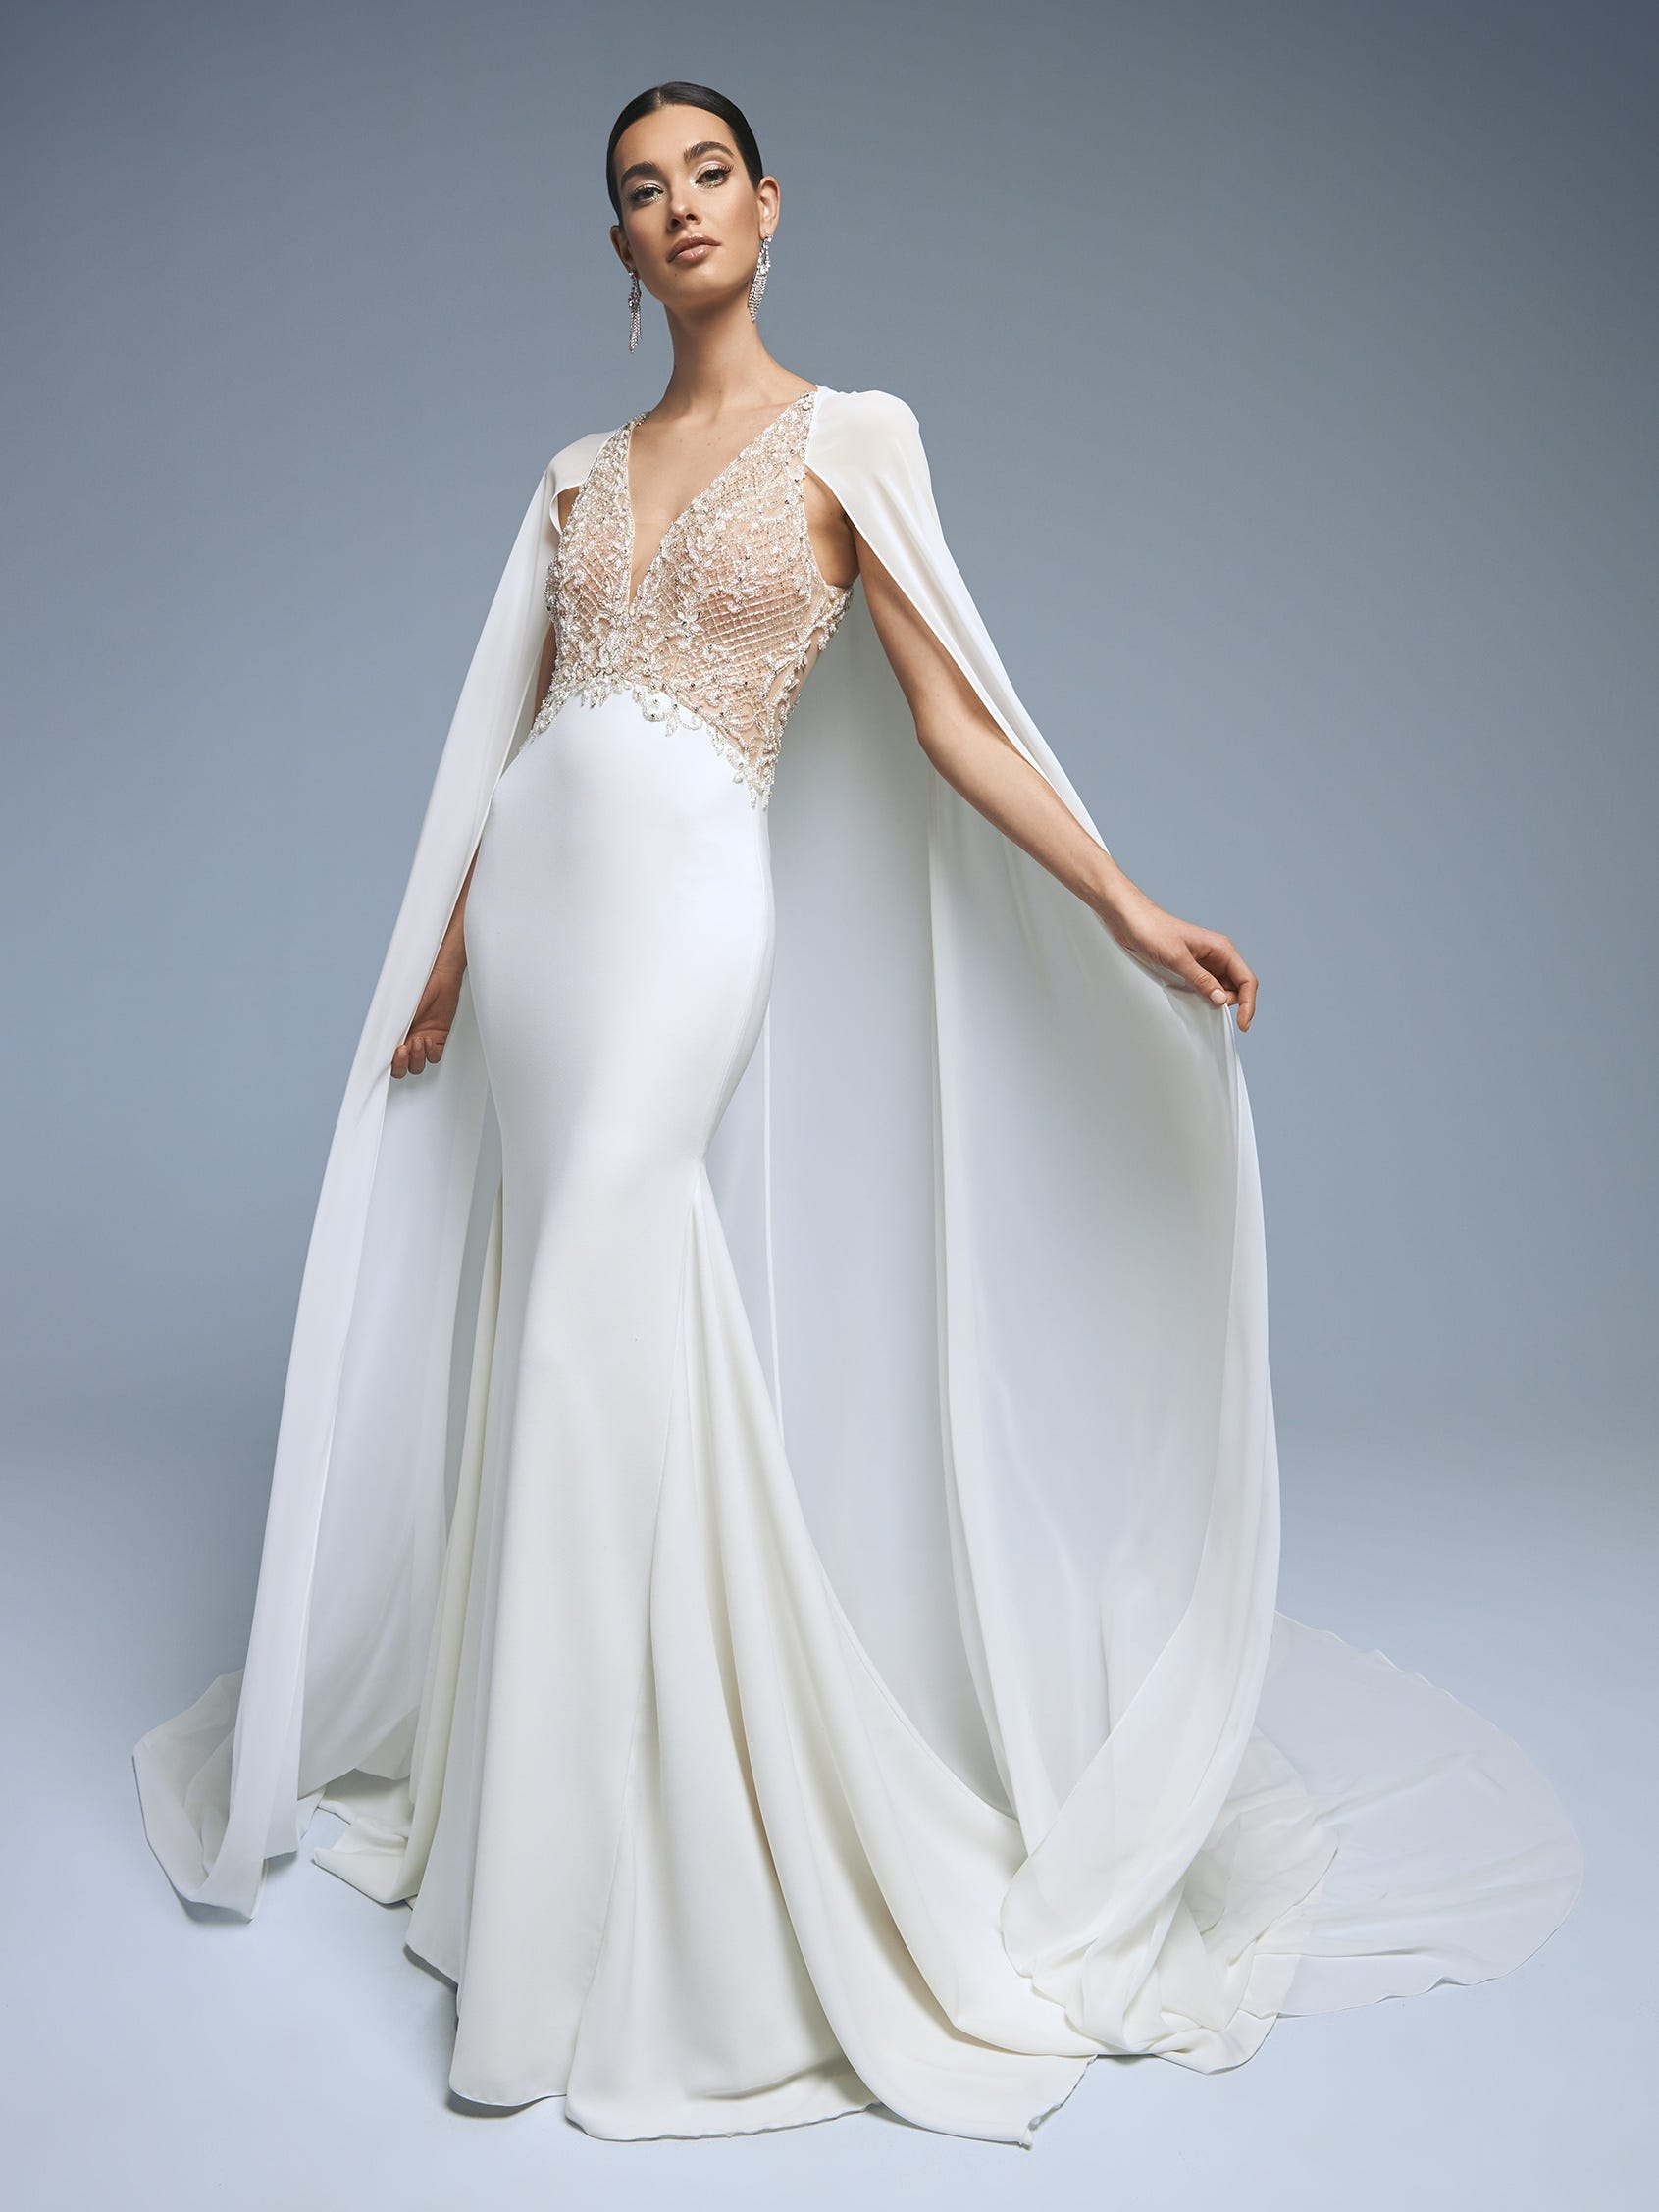 White Flowy Long Cape Sleeved Elegant Evening Formal Dress with Embroidery  - $161.6904 #P74169 - SheProm.com